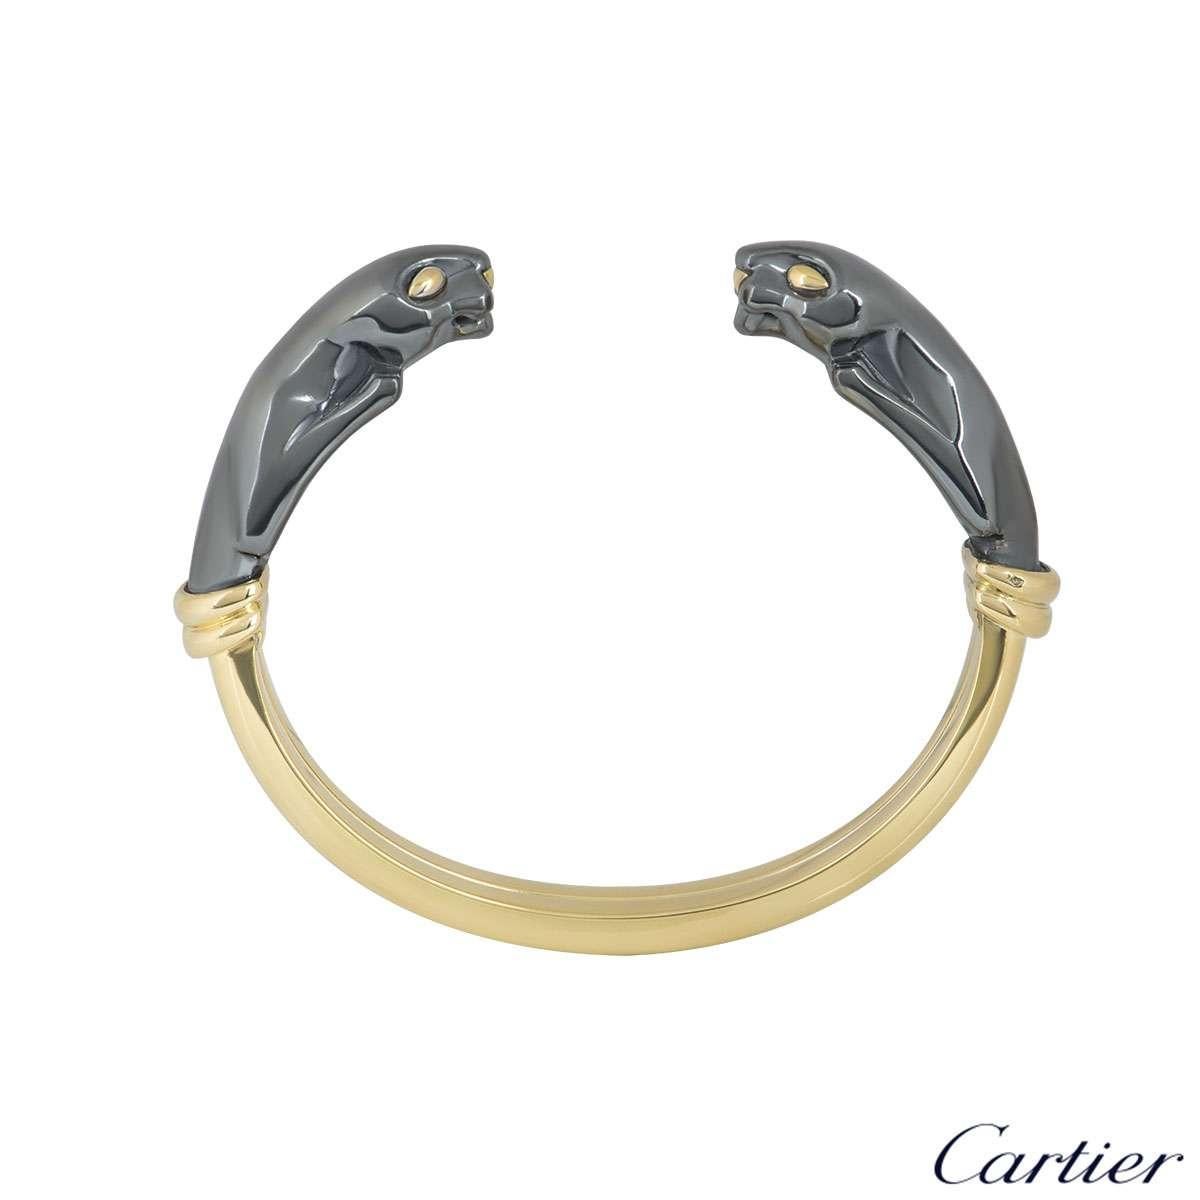 An 18k yellow gold and hematite cuff bracelet from the Panthere de Cartier collection. The bracelet is composed of 2 hematite Panther heads facing each other, joined together by the polished yellow gold cuff. The bracelet would fit a wrist size of